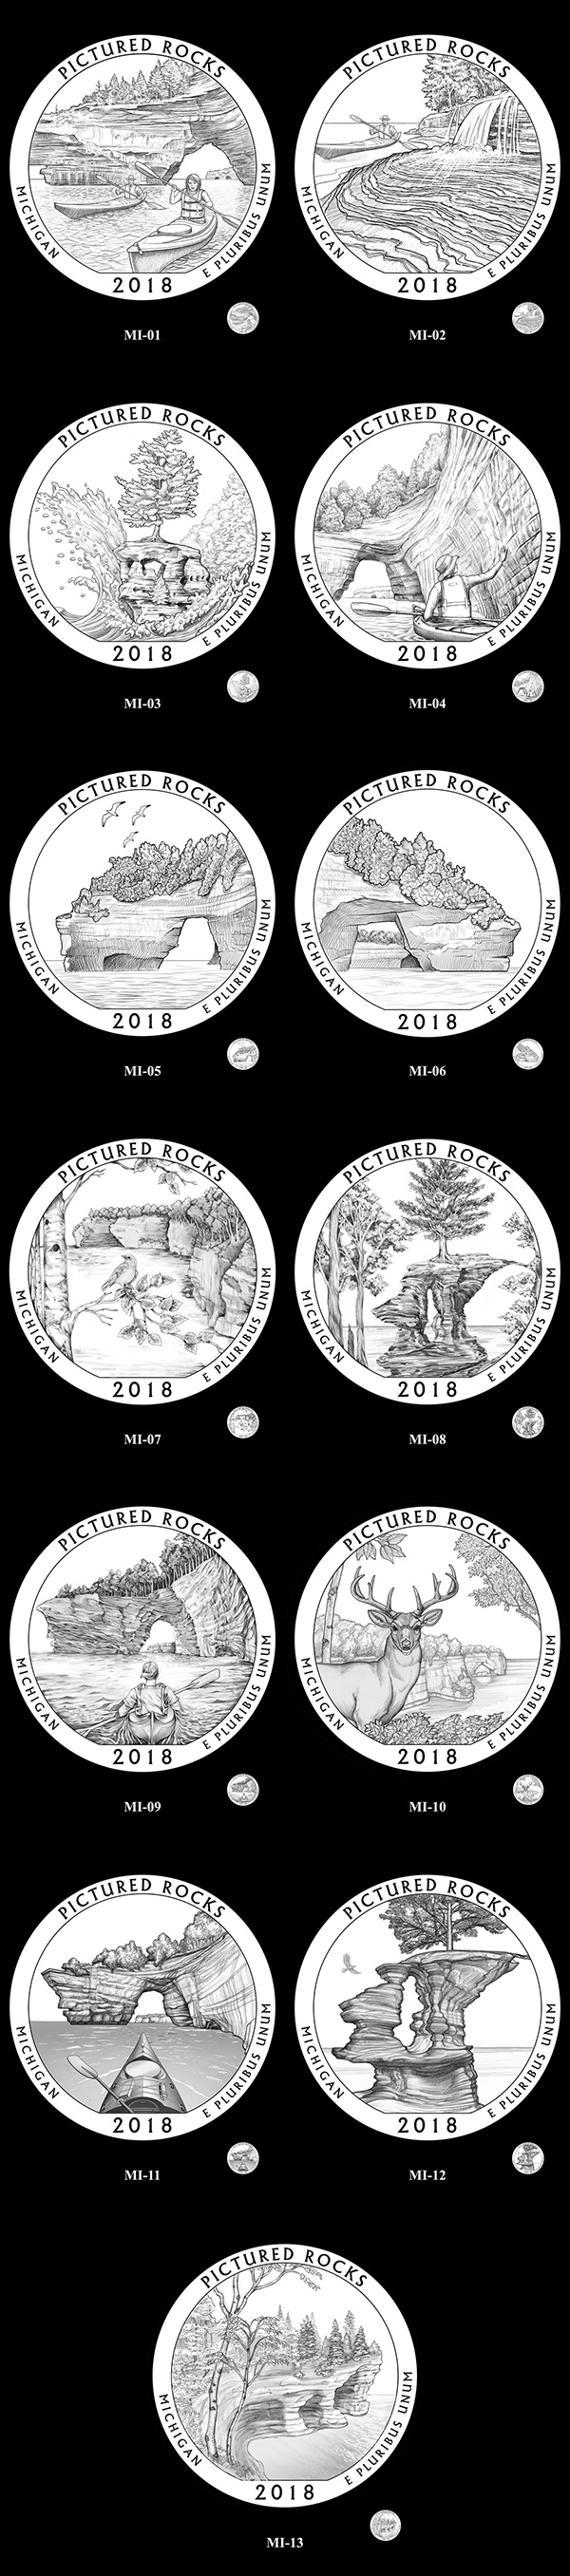 Candidate designs for new 2018 Pictured Rocks National Lakeshore Quarter